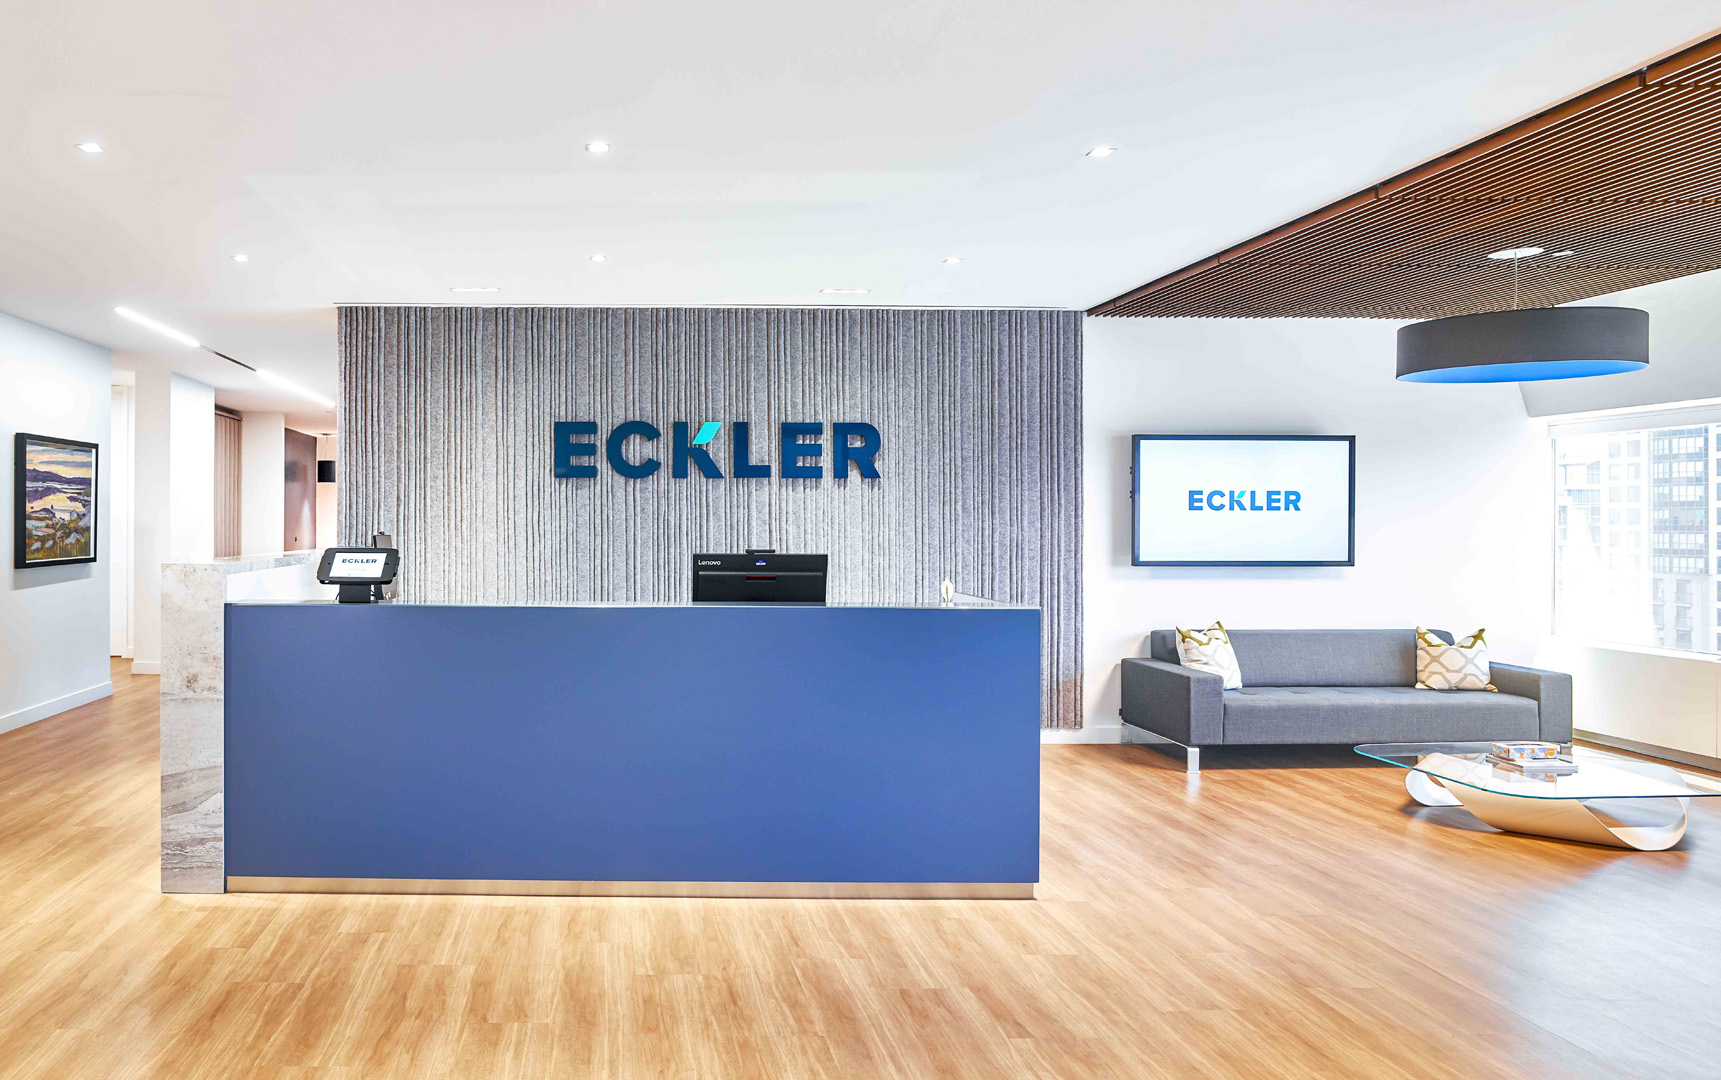 Story Time, Behind the Scenes of Designing Eckler Toronto, Ontario | SGH Design Partners